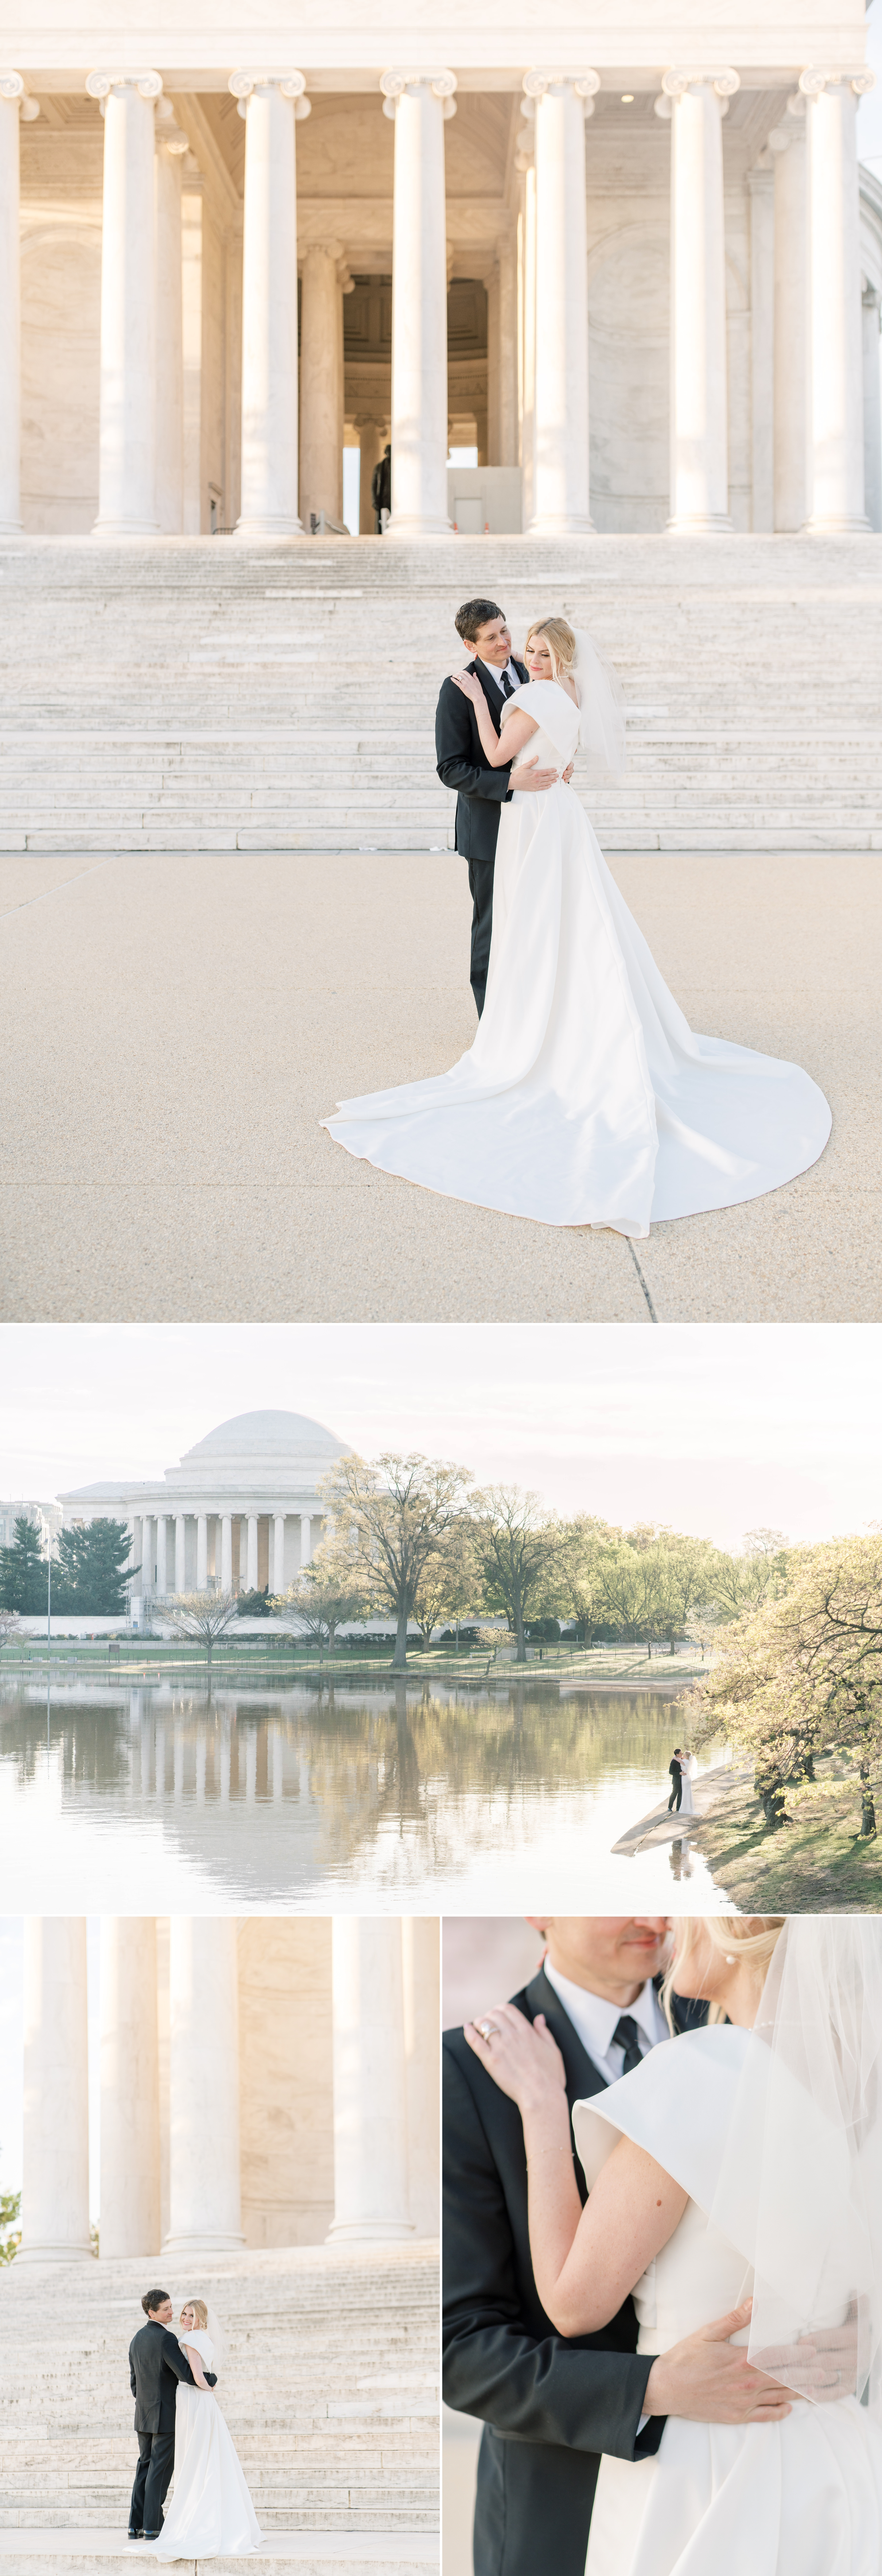 Stunning "day after" wedding portraits at the Jefferson Memorial in Washington, DC.